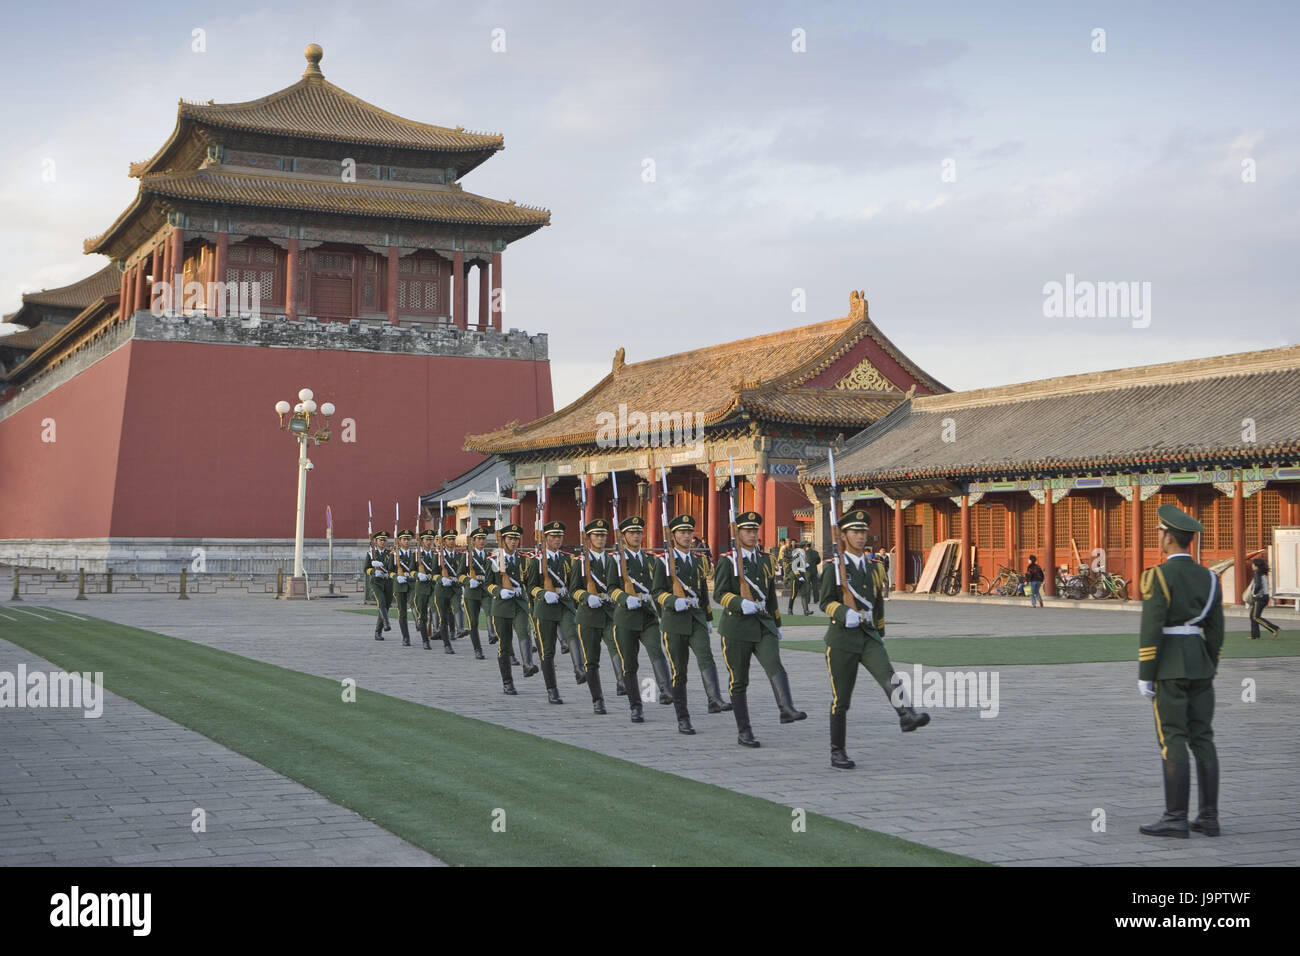 China,Peking,Forbidden City,imperial palace,soldier,drill,no model release,Asia,Eastern Asia,town,capital,part of town,destination,palace,palace museum,building,structure,palace building,architecture,place of interest,culture,tourism,UNESCO-world cultural heritage,architecture,person,guards,awake soldiers, Stock Photo